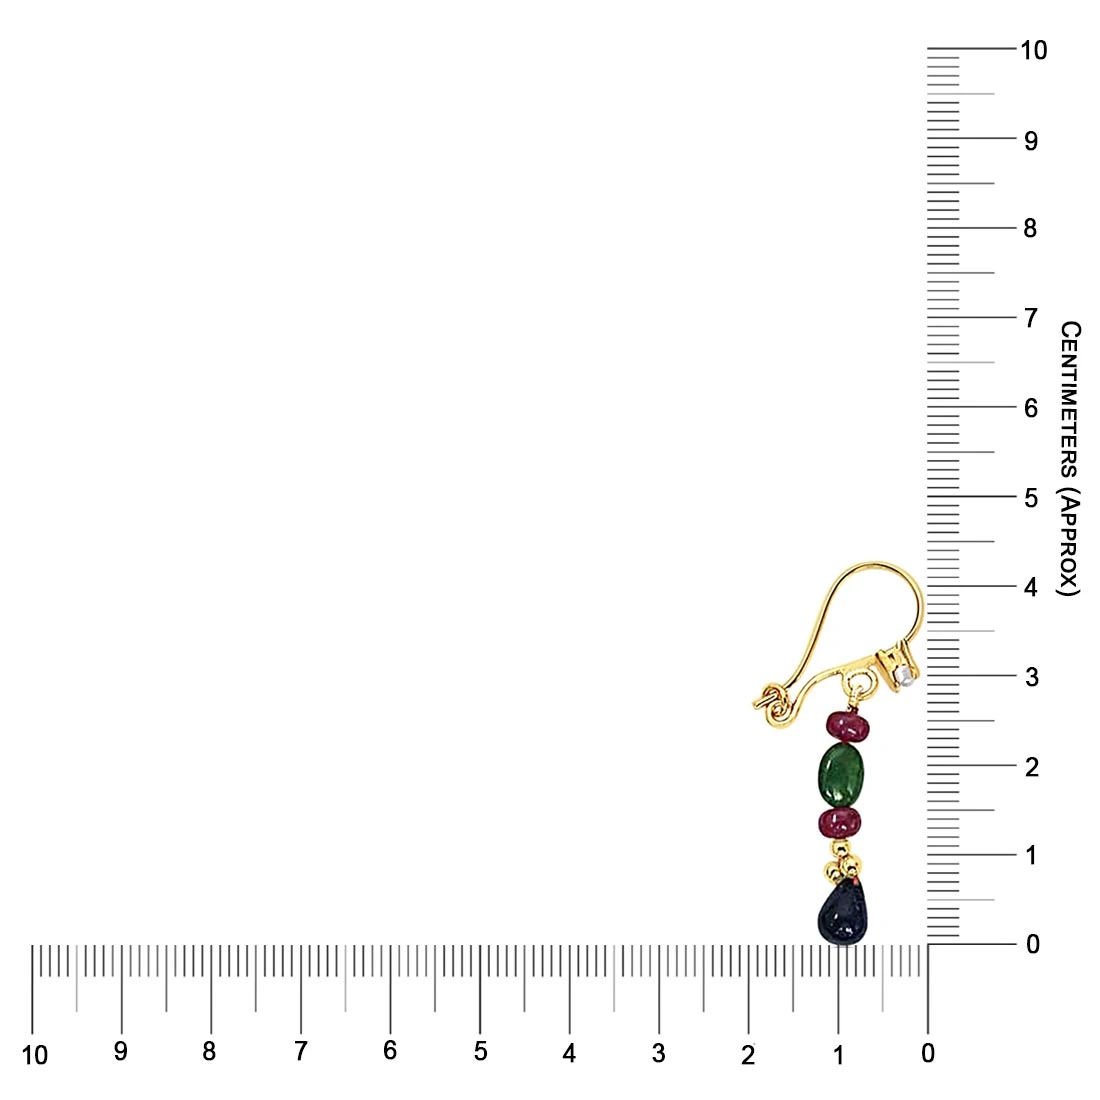 Real Drop Sapphire, Oval Emerald & Ruby Beads Hanging Earrings for Women (SE128)